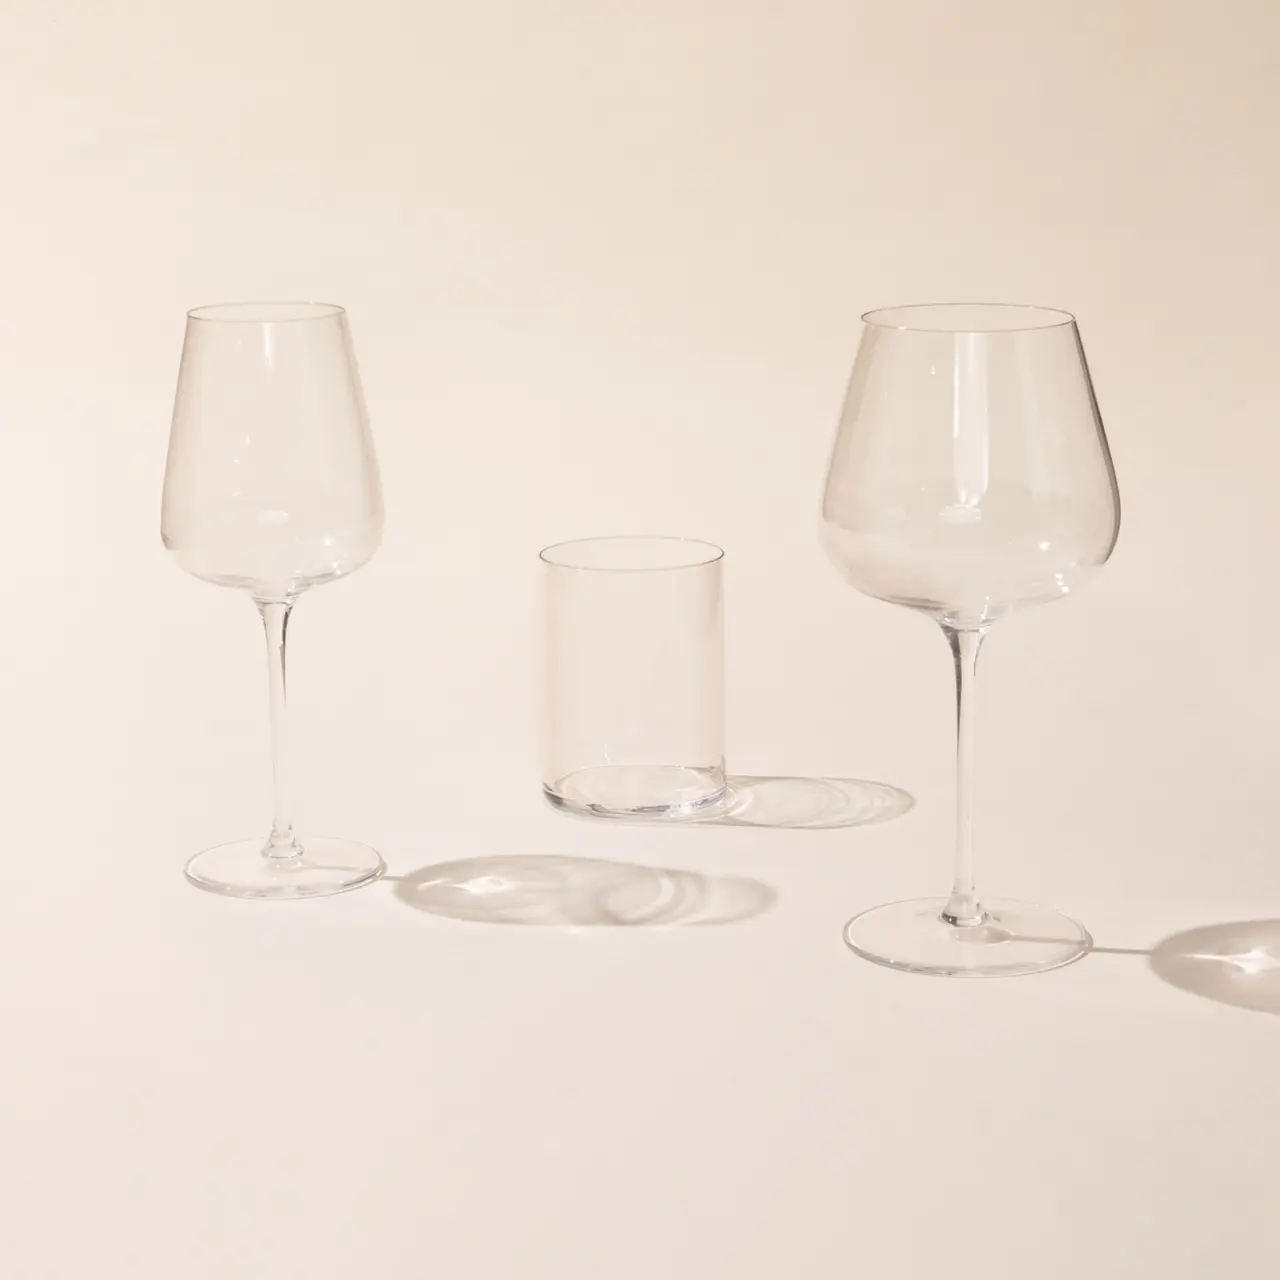 glassware set with wine glasses and drinking glass